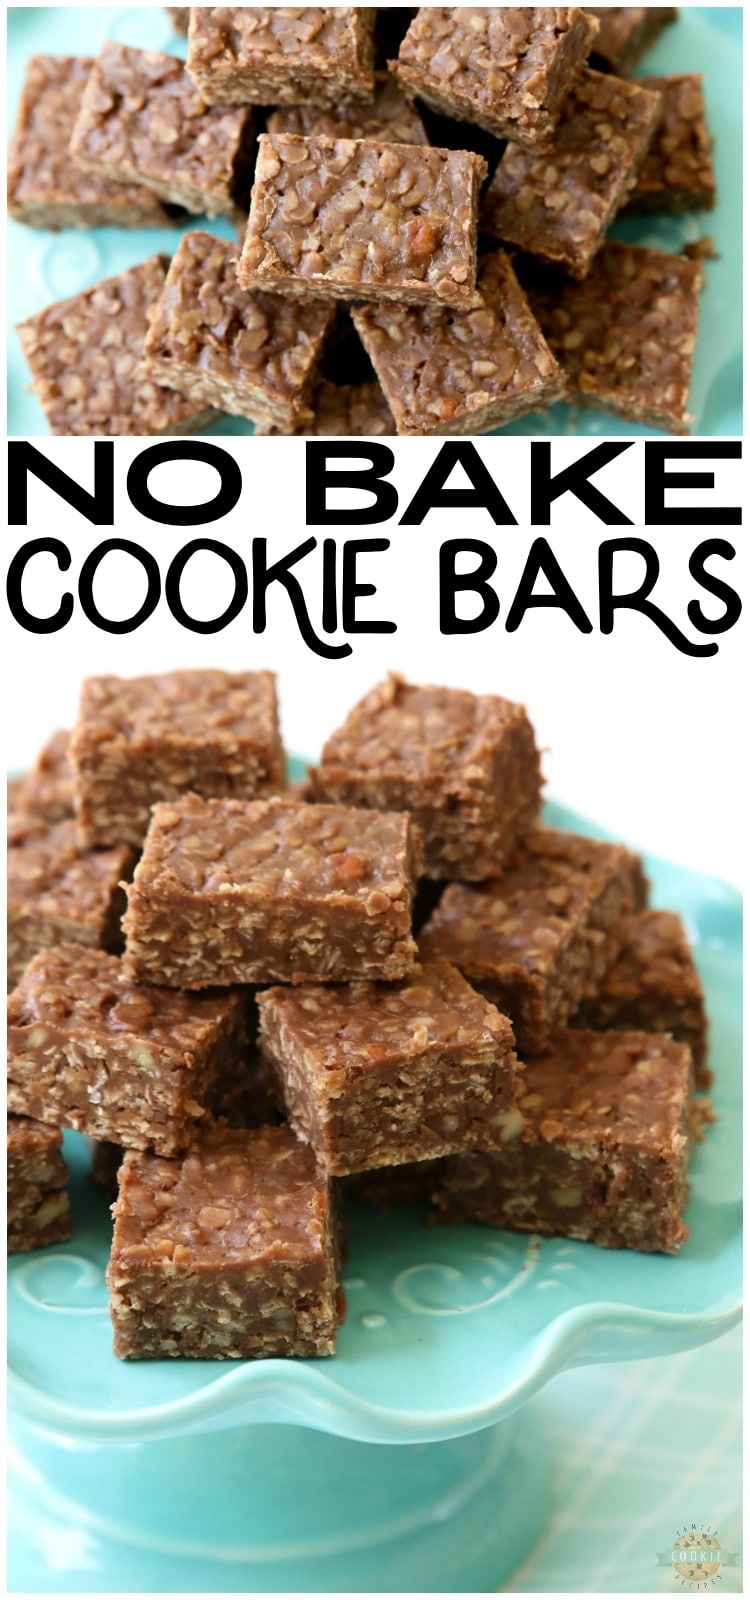 No Bake Cookie Bars recipe is a quick variation on THE BEST no bake cookies recipe. Made with quick oats & chocolate chips, these no bake oatmeal cookies couldn't be tastier! via @buttergirls